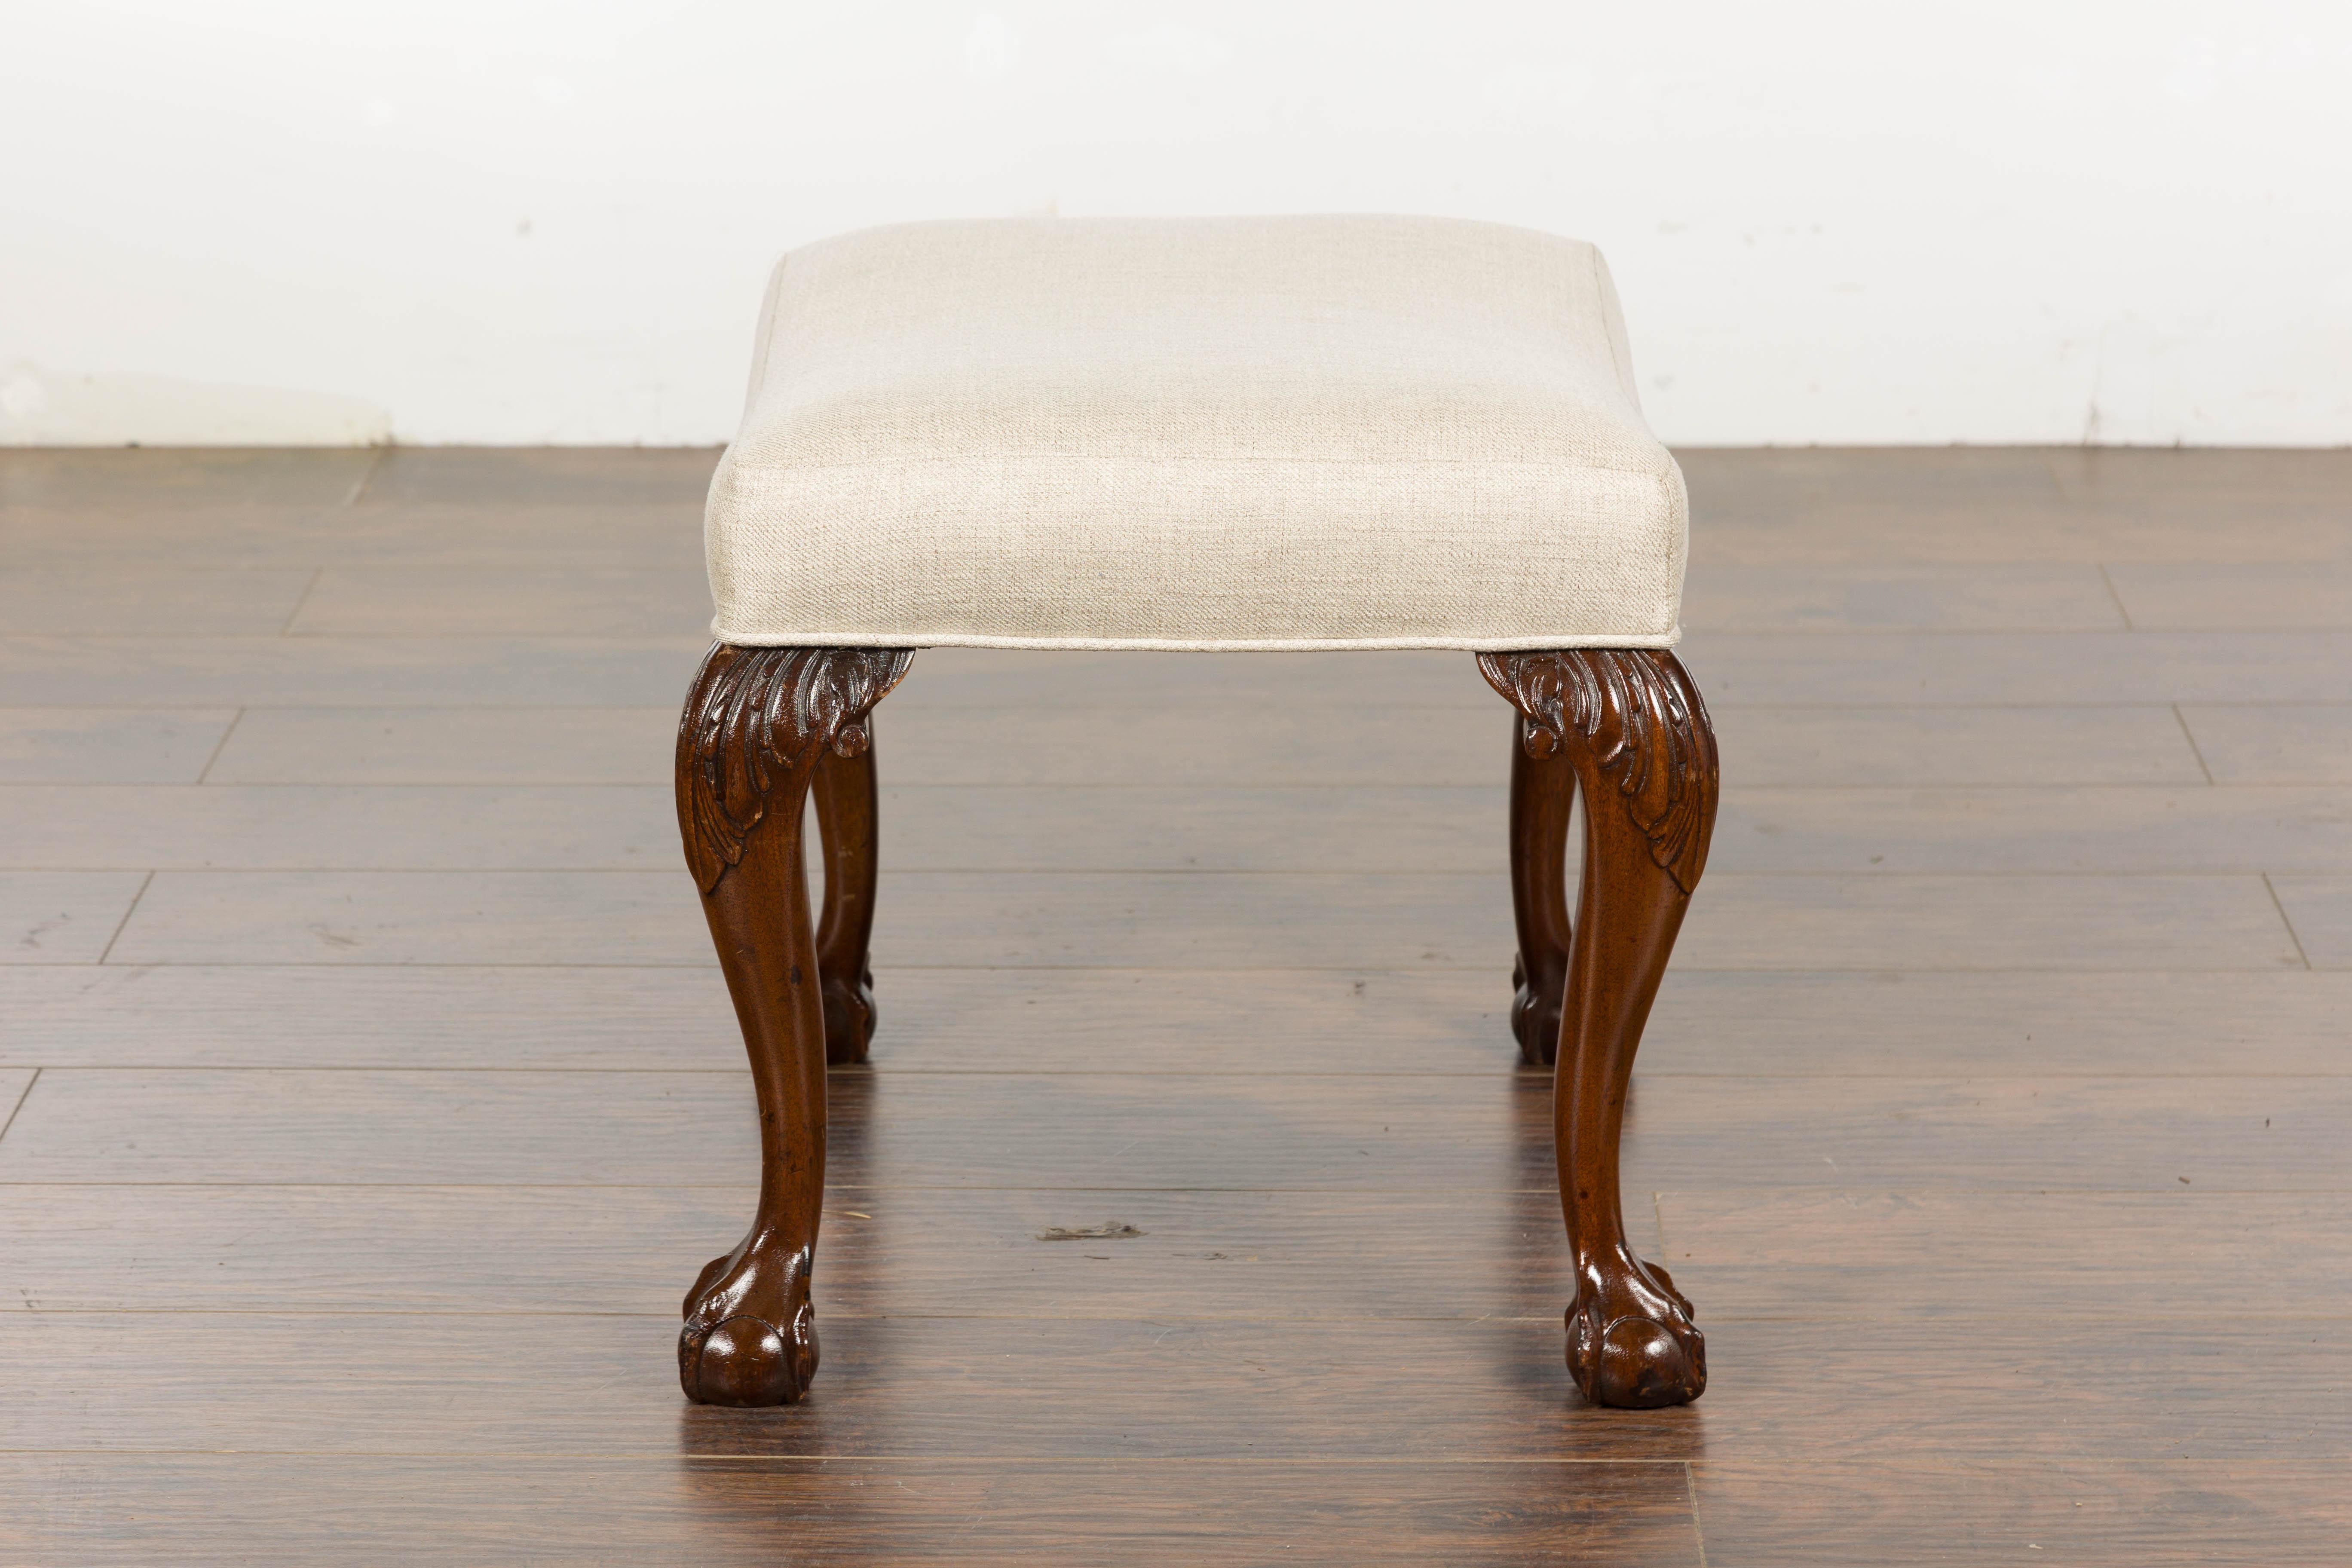 19th Century English Mahogany Upholstered Stool with Cabriole Legs For Sale 6